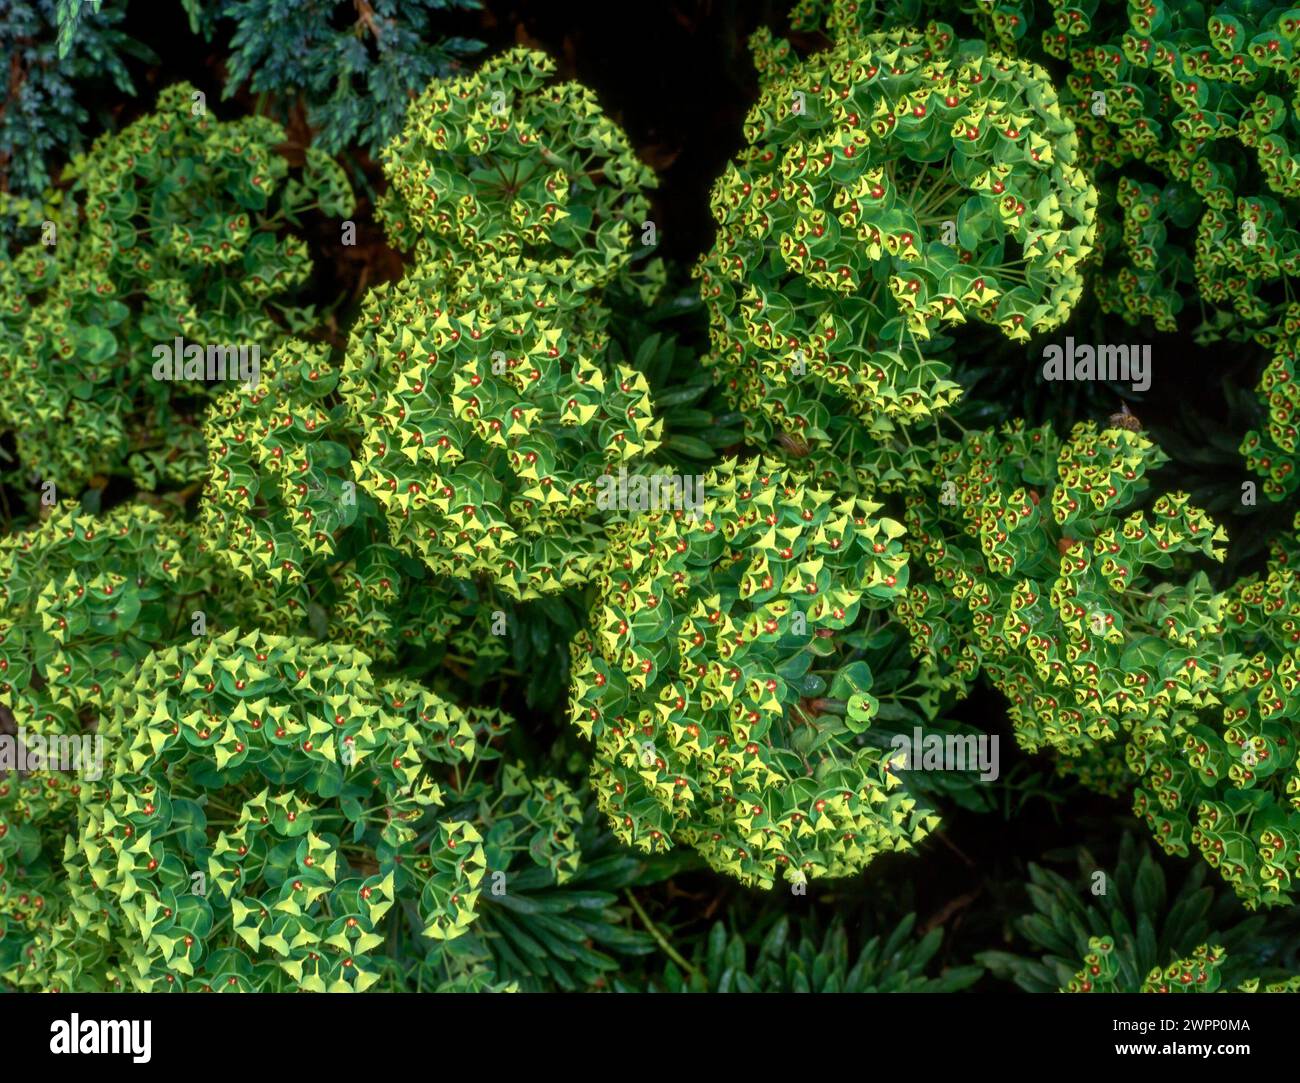 Looking down on bracts and flowers of Euphorbia martinii / martini spurge growing in English Garden, England, UK Stock Photo